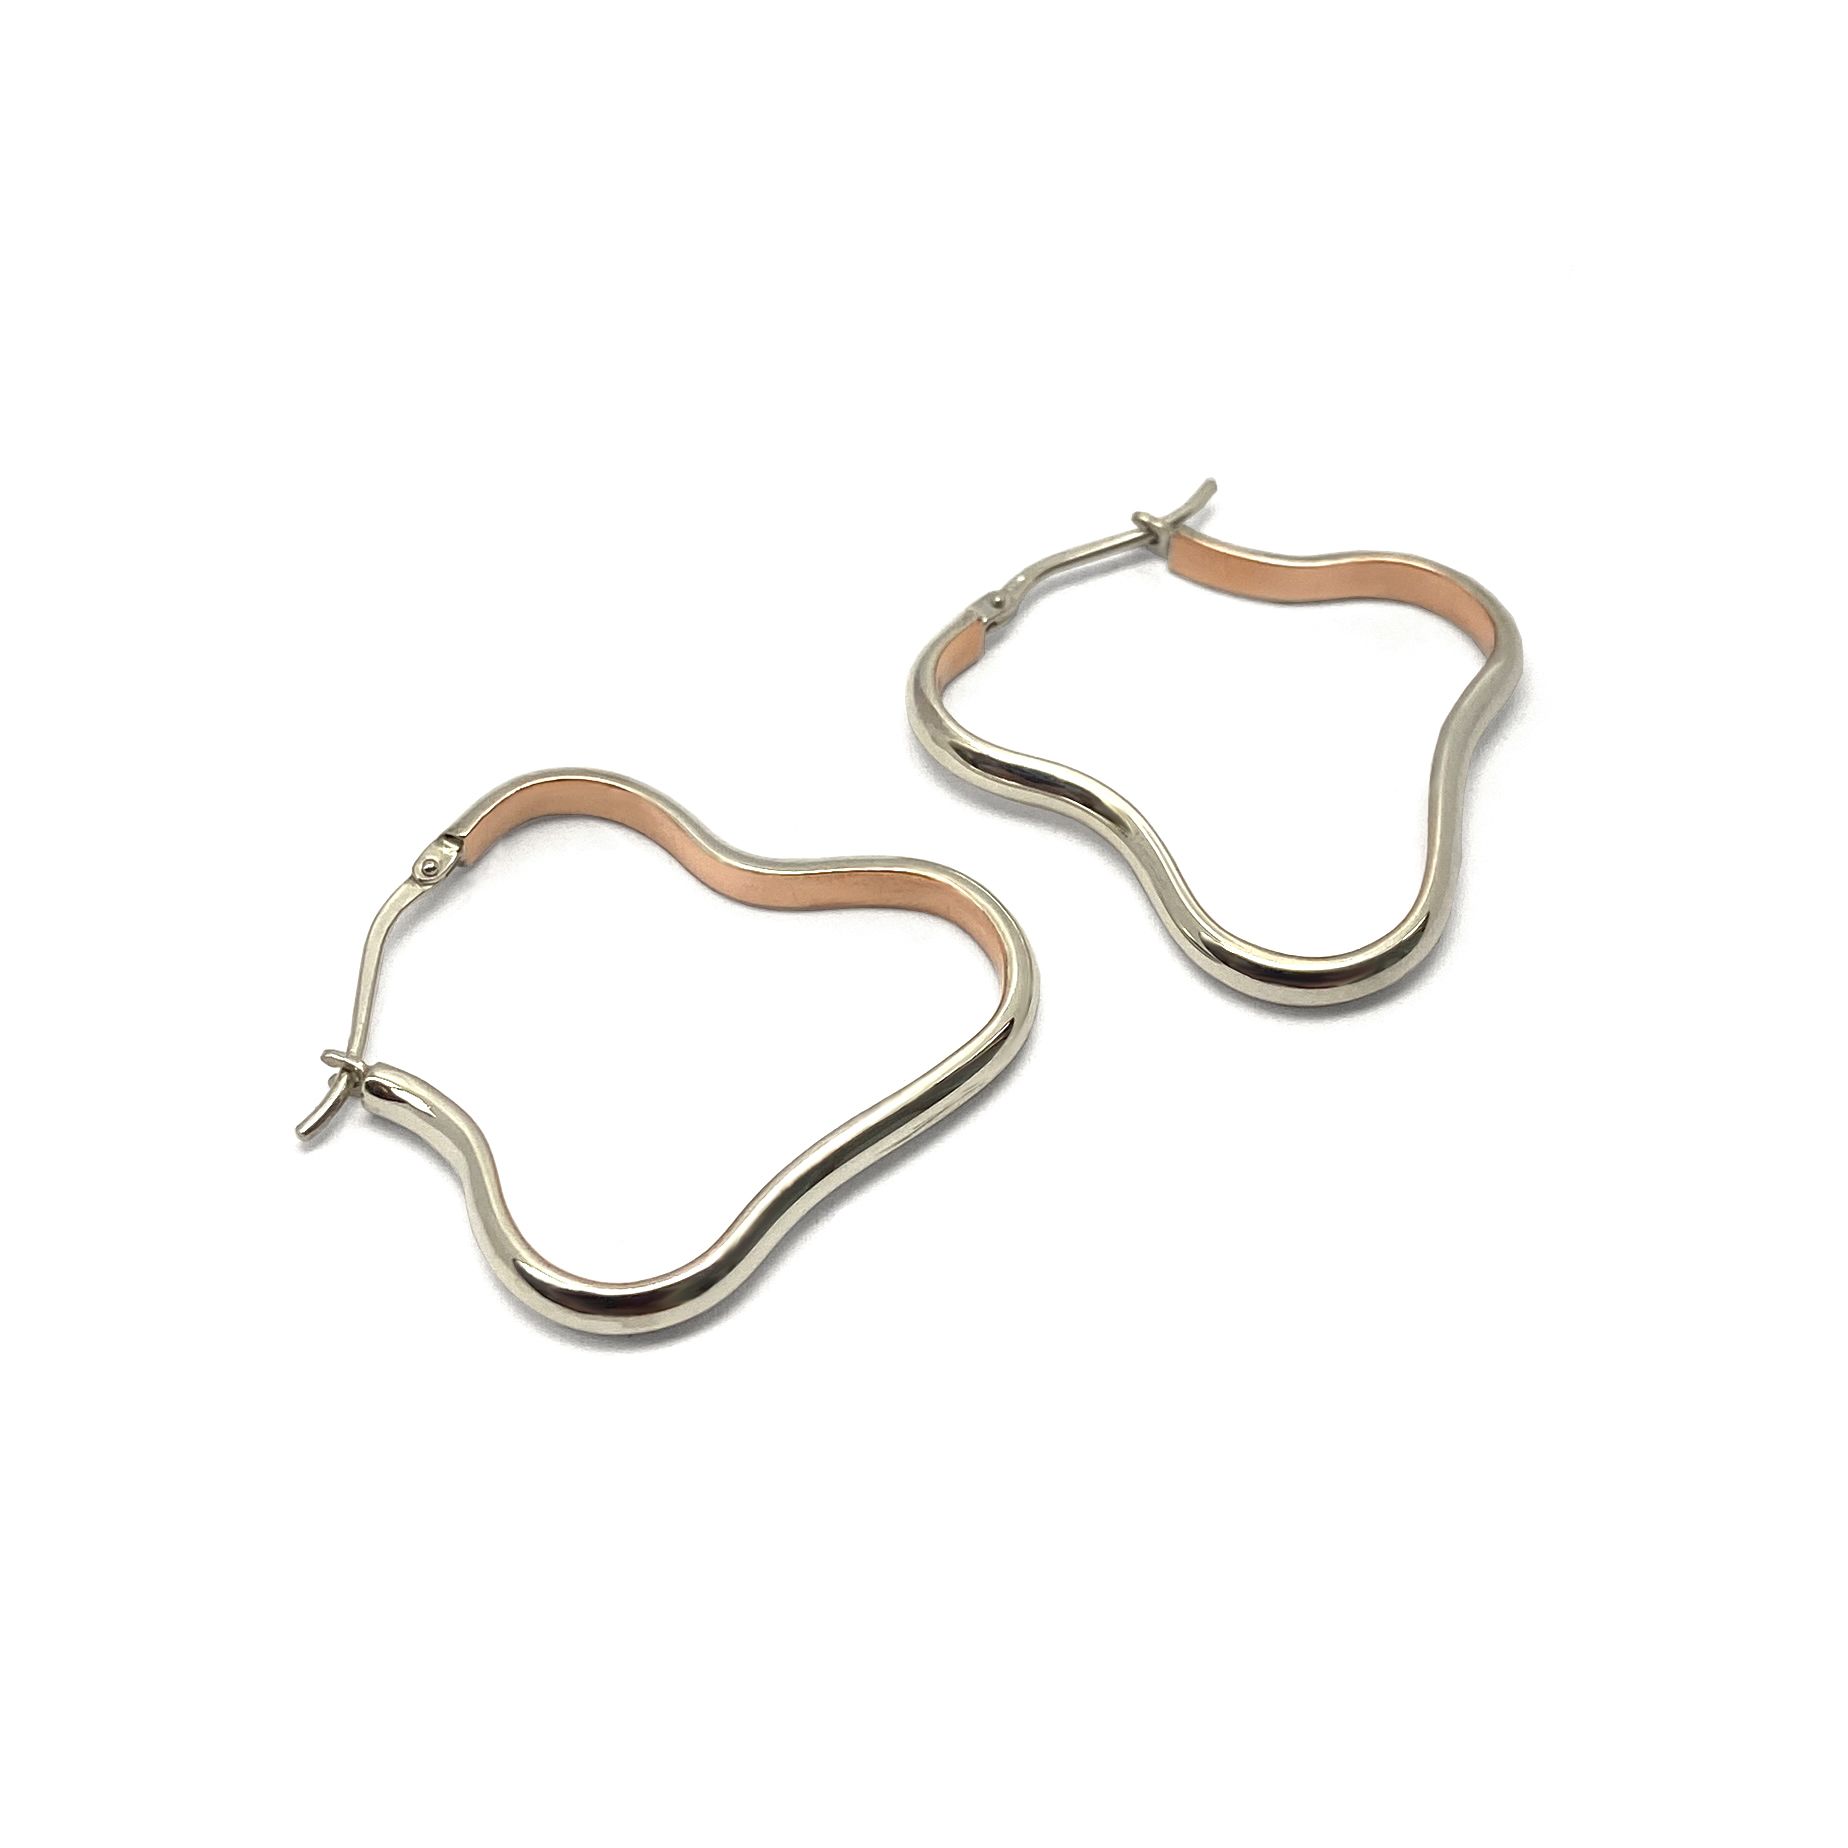 Claudine Moncion: Hoop Earrings Large Product Image 1 of 1